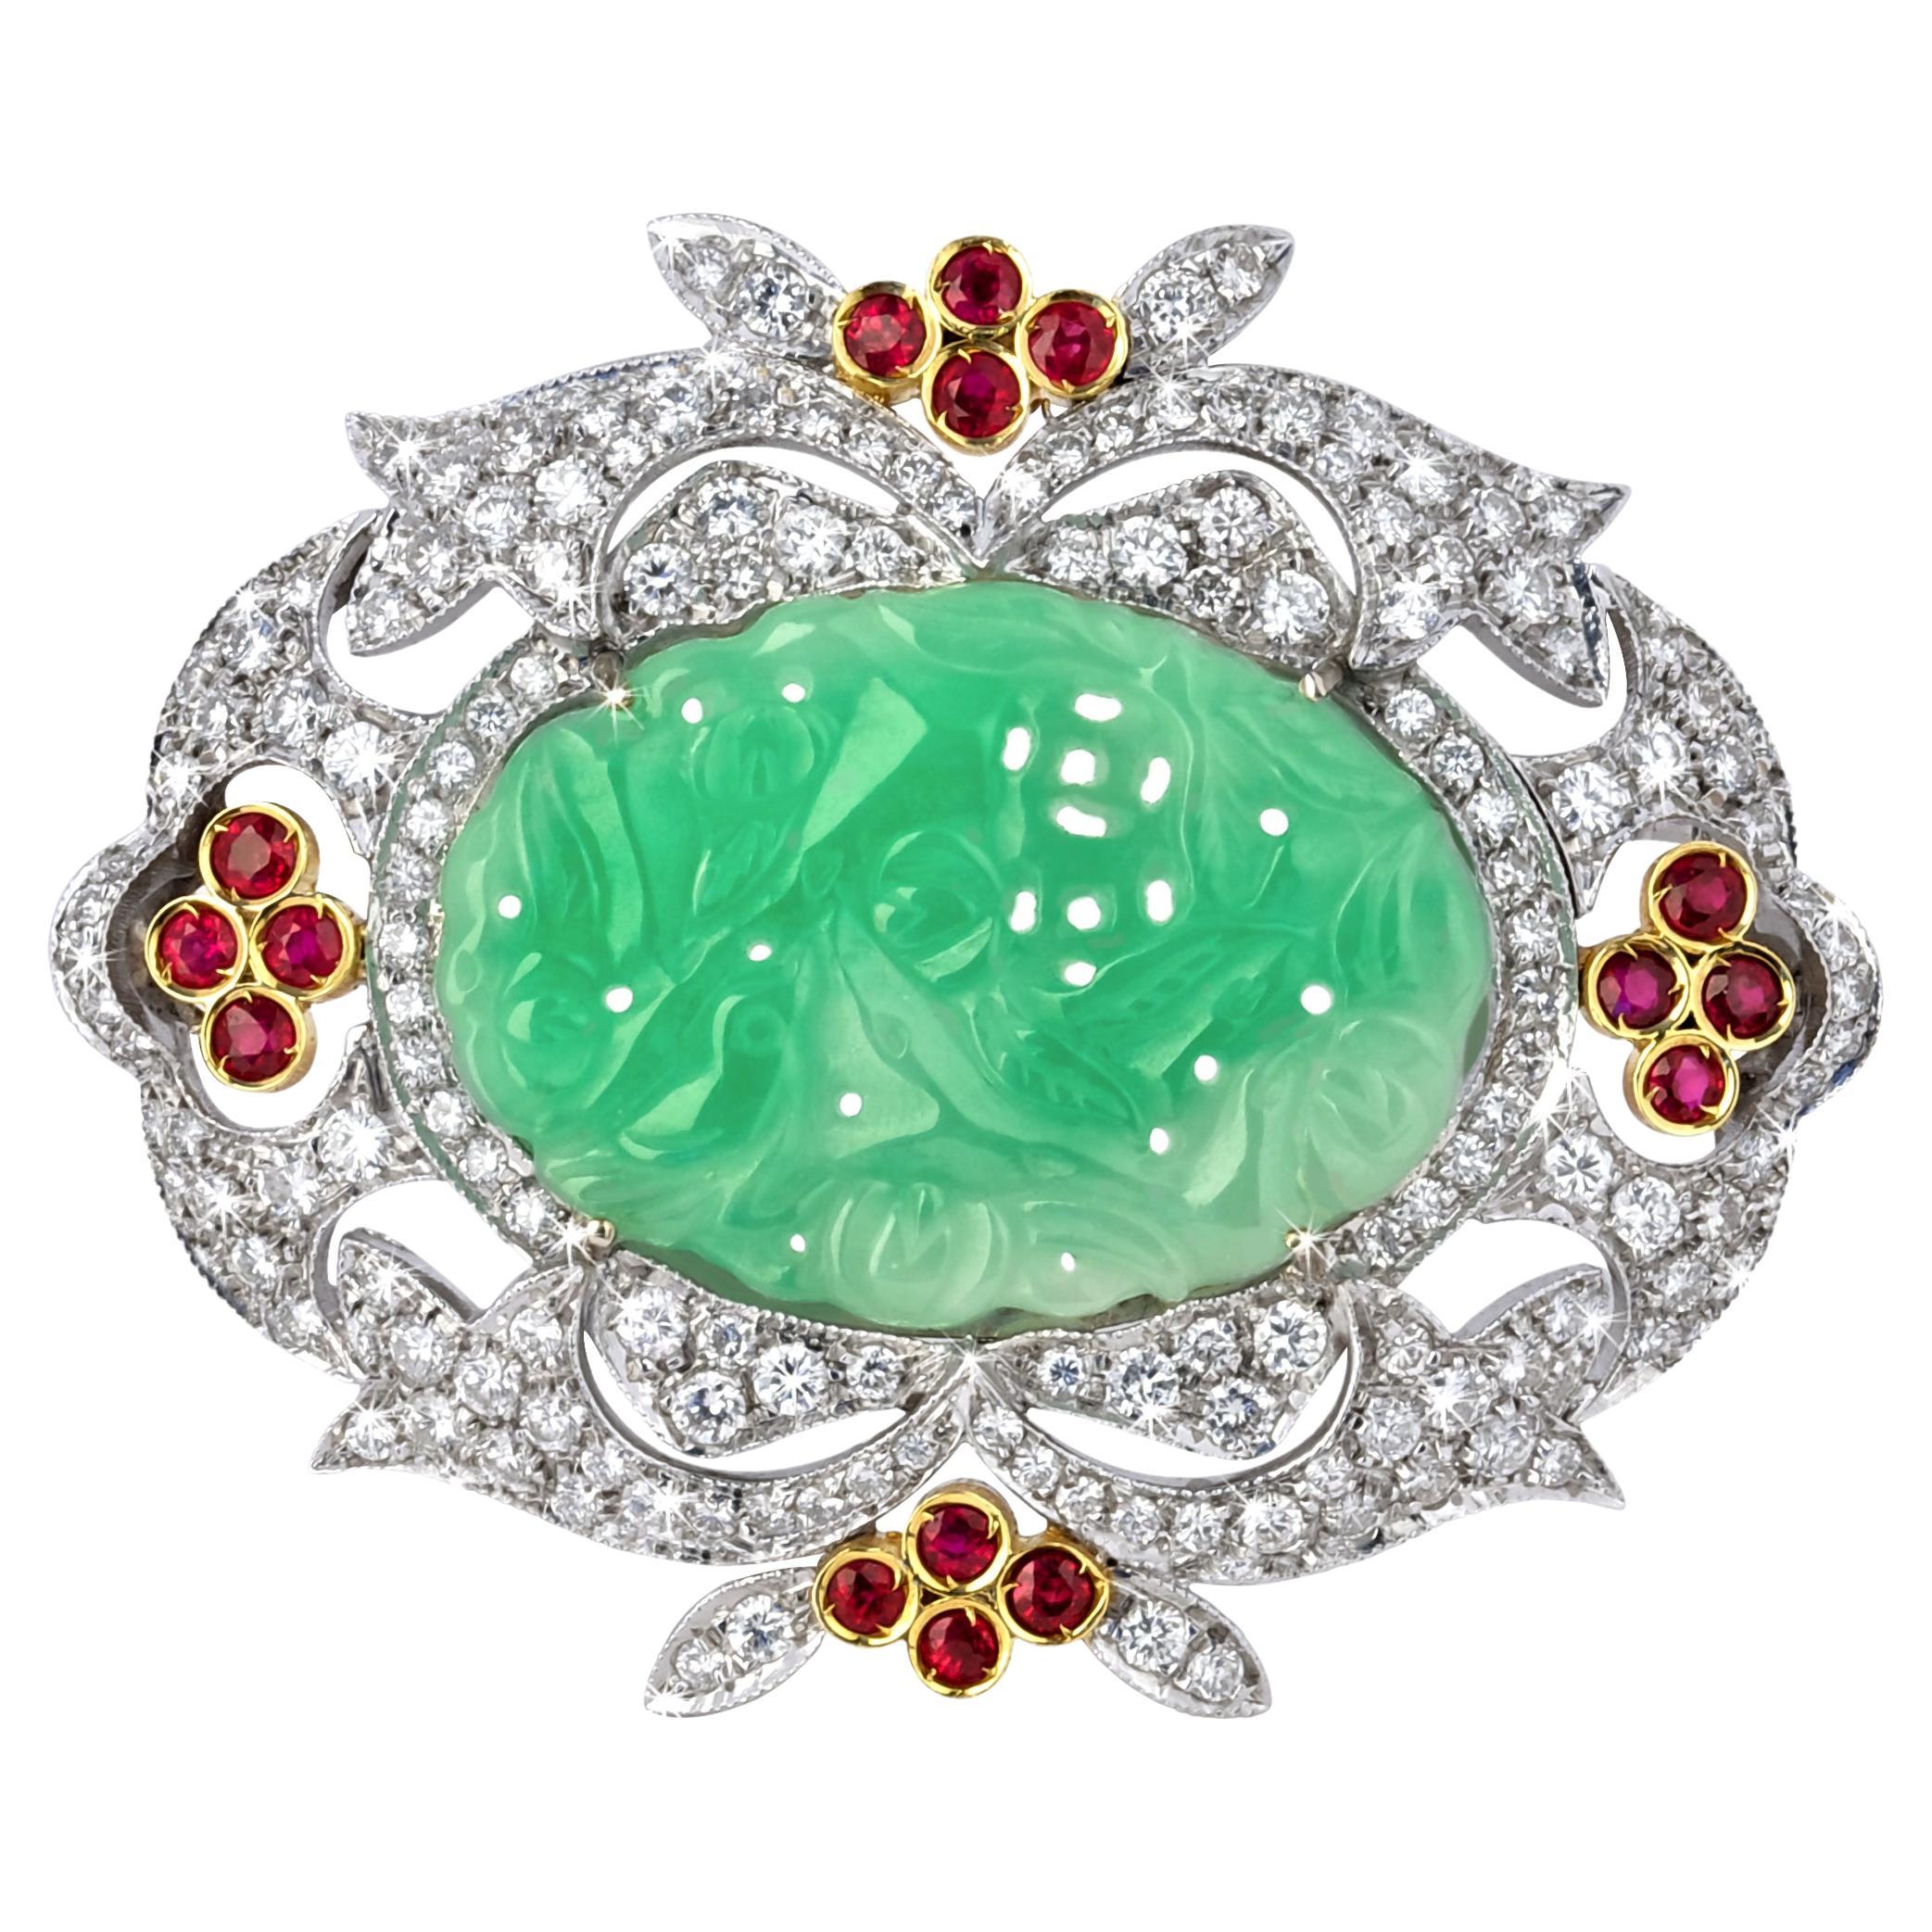 Vintage Jade Brooch From ANGELETTI PRIVATE COLLECTION Gold with Diamonds Rubies